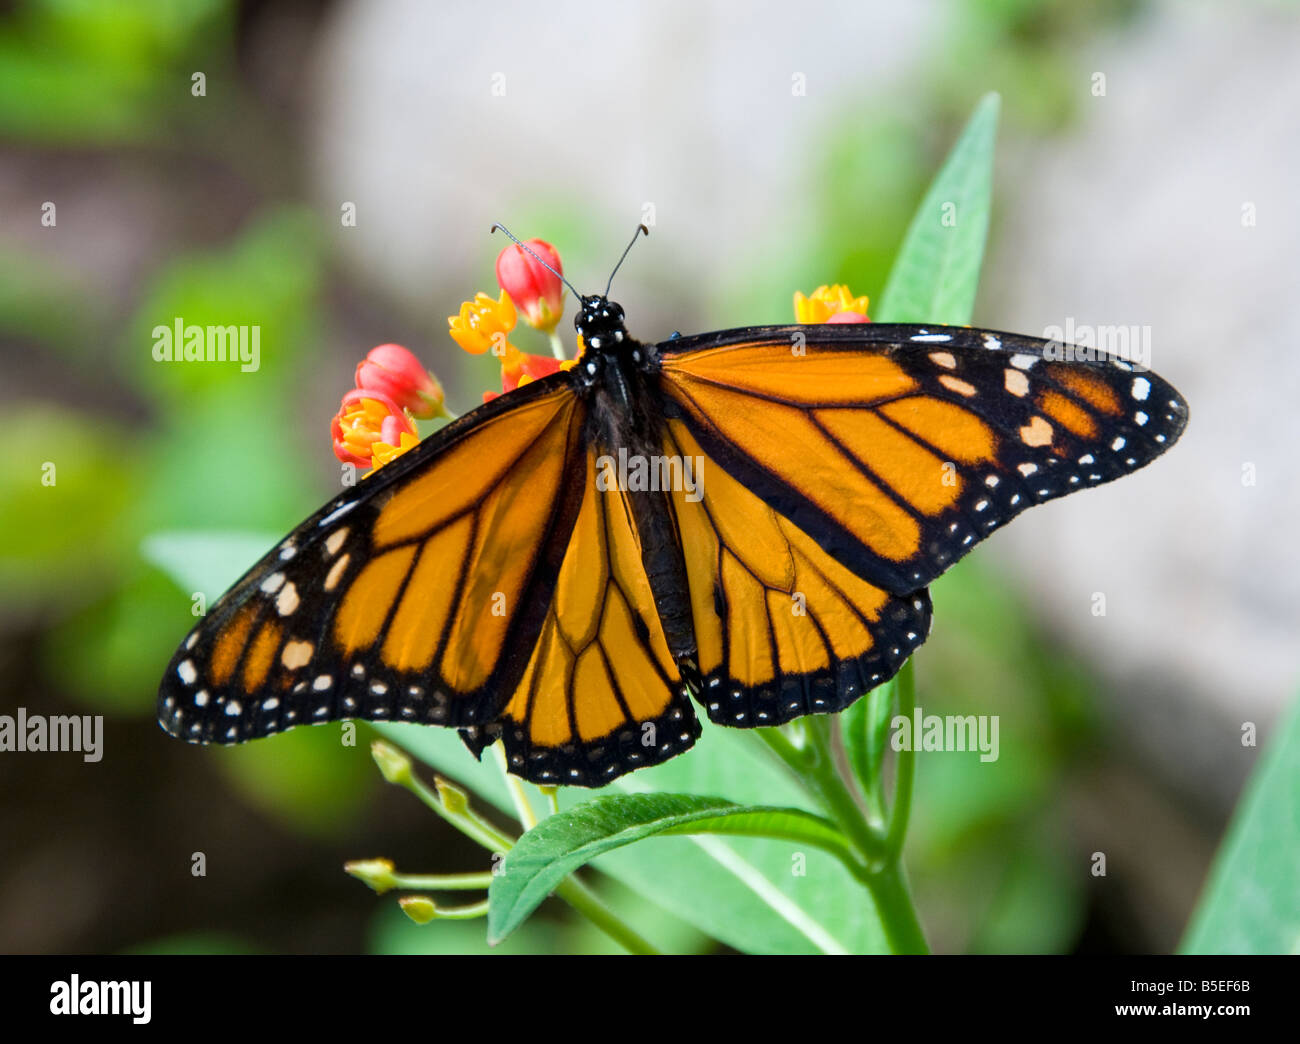 Monarch butterfly with open wings on flowers in lush sunny natural habitat Stock Photo